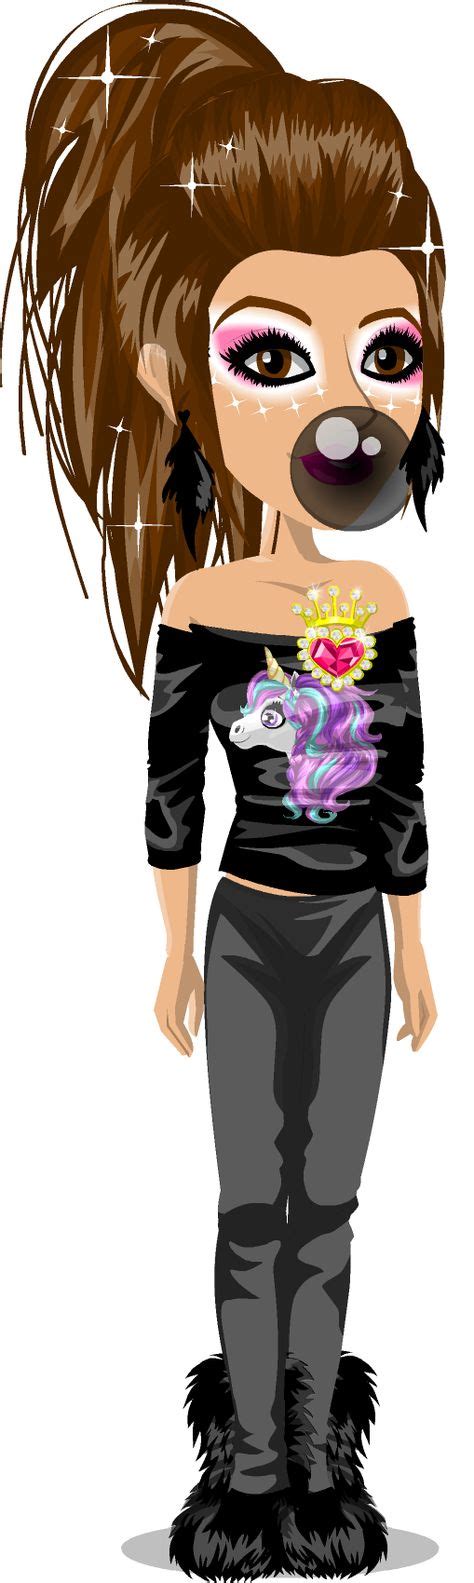 Msp Emo Outfit Moviestarplant Pinterest Emo Outfits And Movie Star Planet